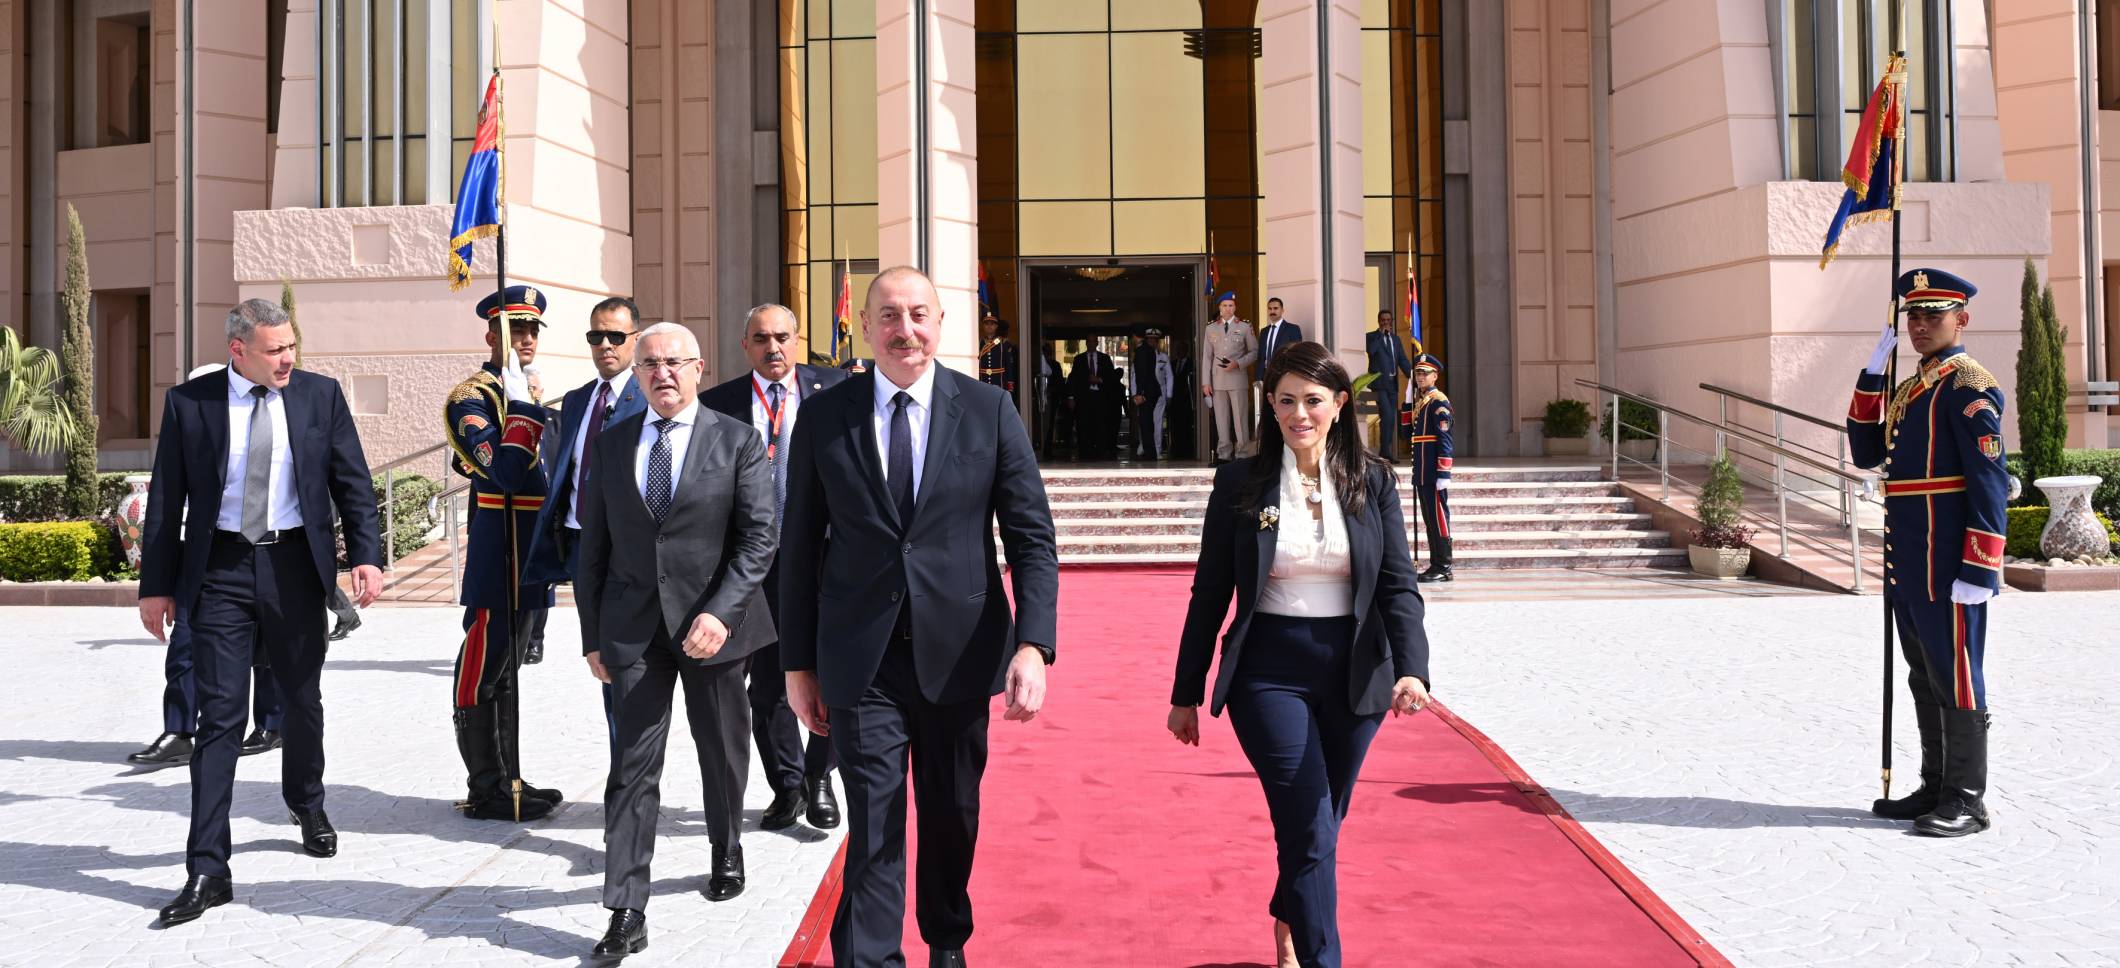 Ilham Aliyev completed his official visit to Egypt